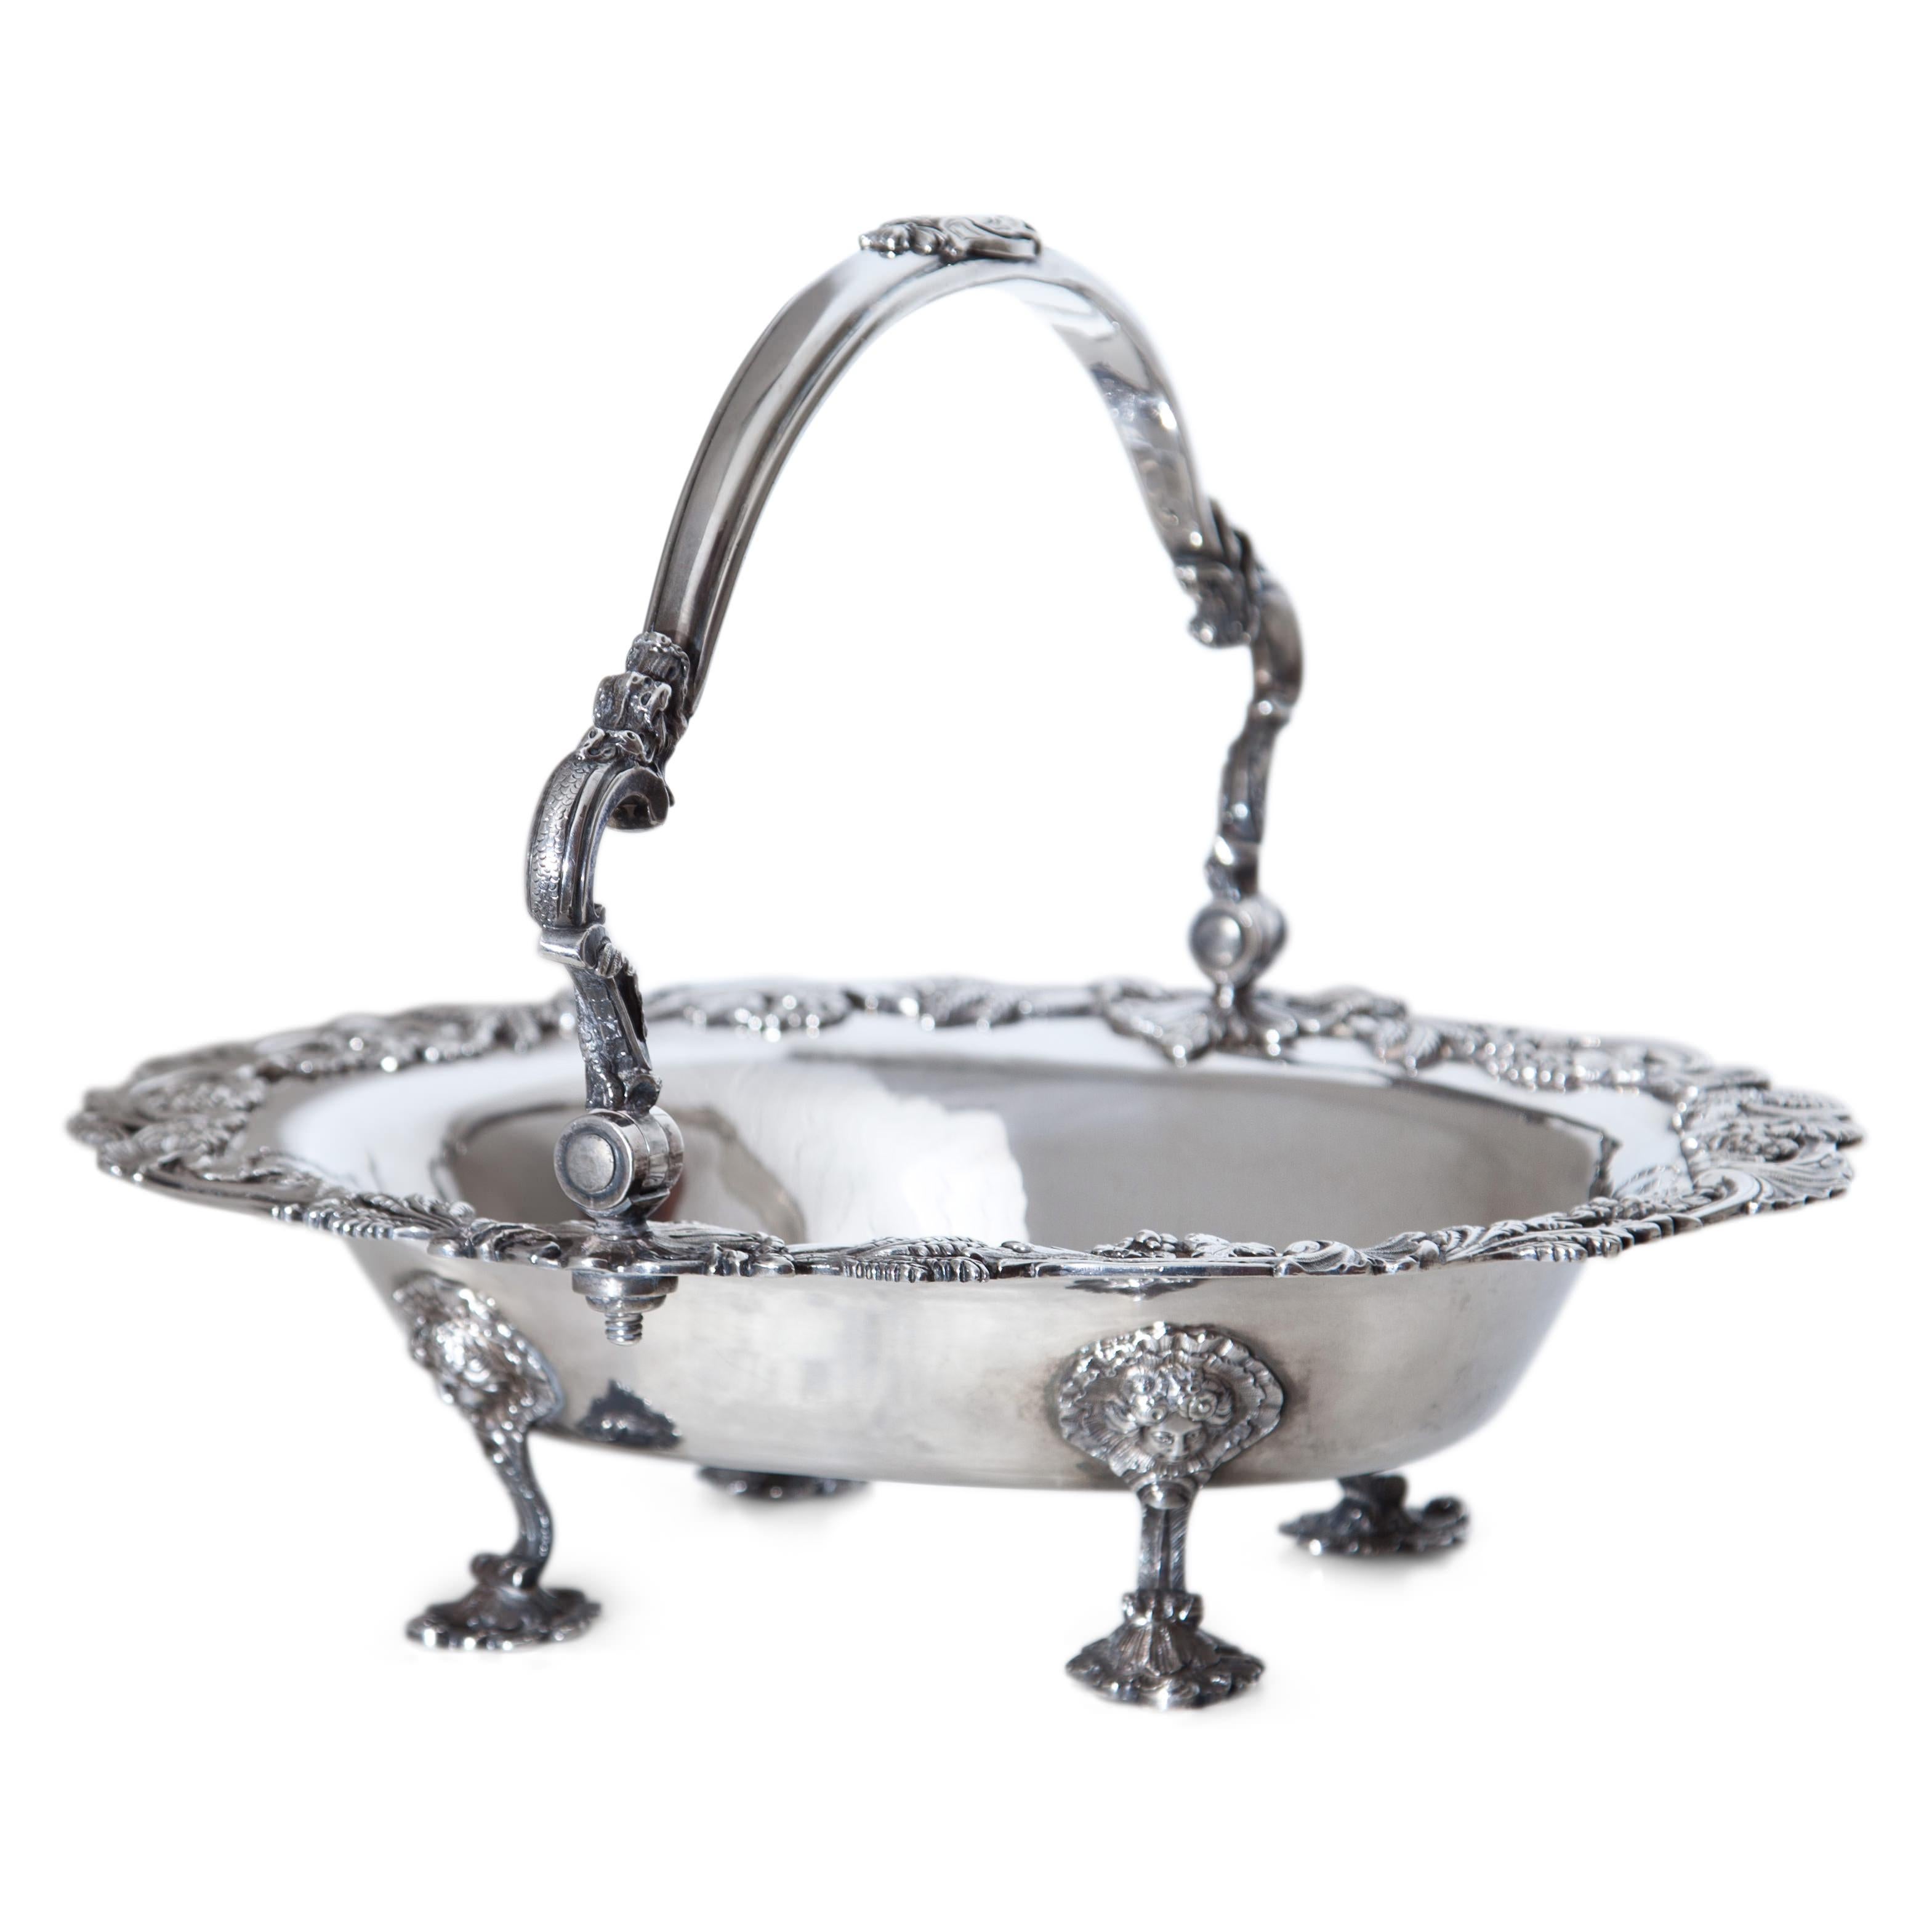 Silver bowl on high rocaille feet decorated with macarons and shells. The rim also shows decorations in the form of shells, ears of corn and vines. The smooth handle with asymmetrical rocaille ornamentation at the apex. On the mirror incised